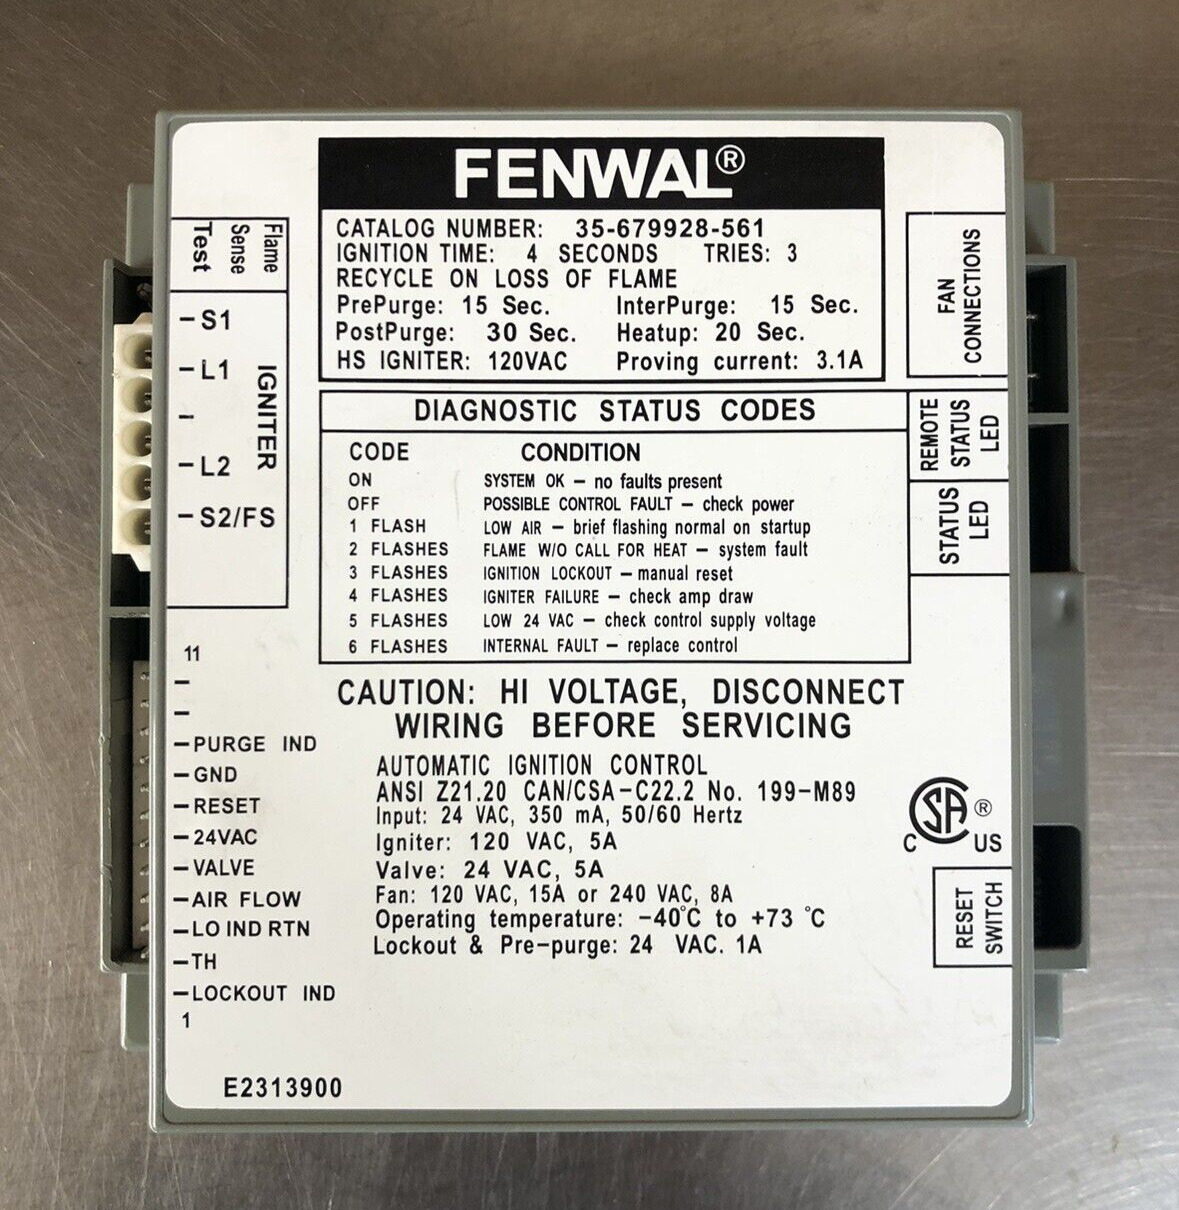 Fenwal Ignition Controller 35-679928-561 Tries 3